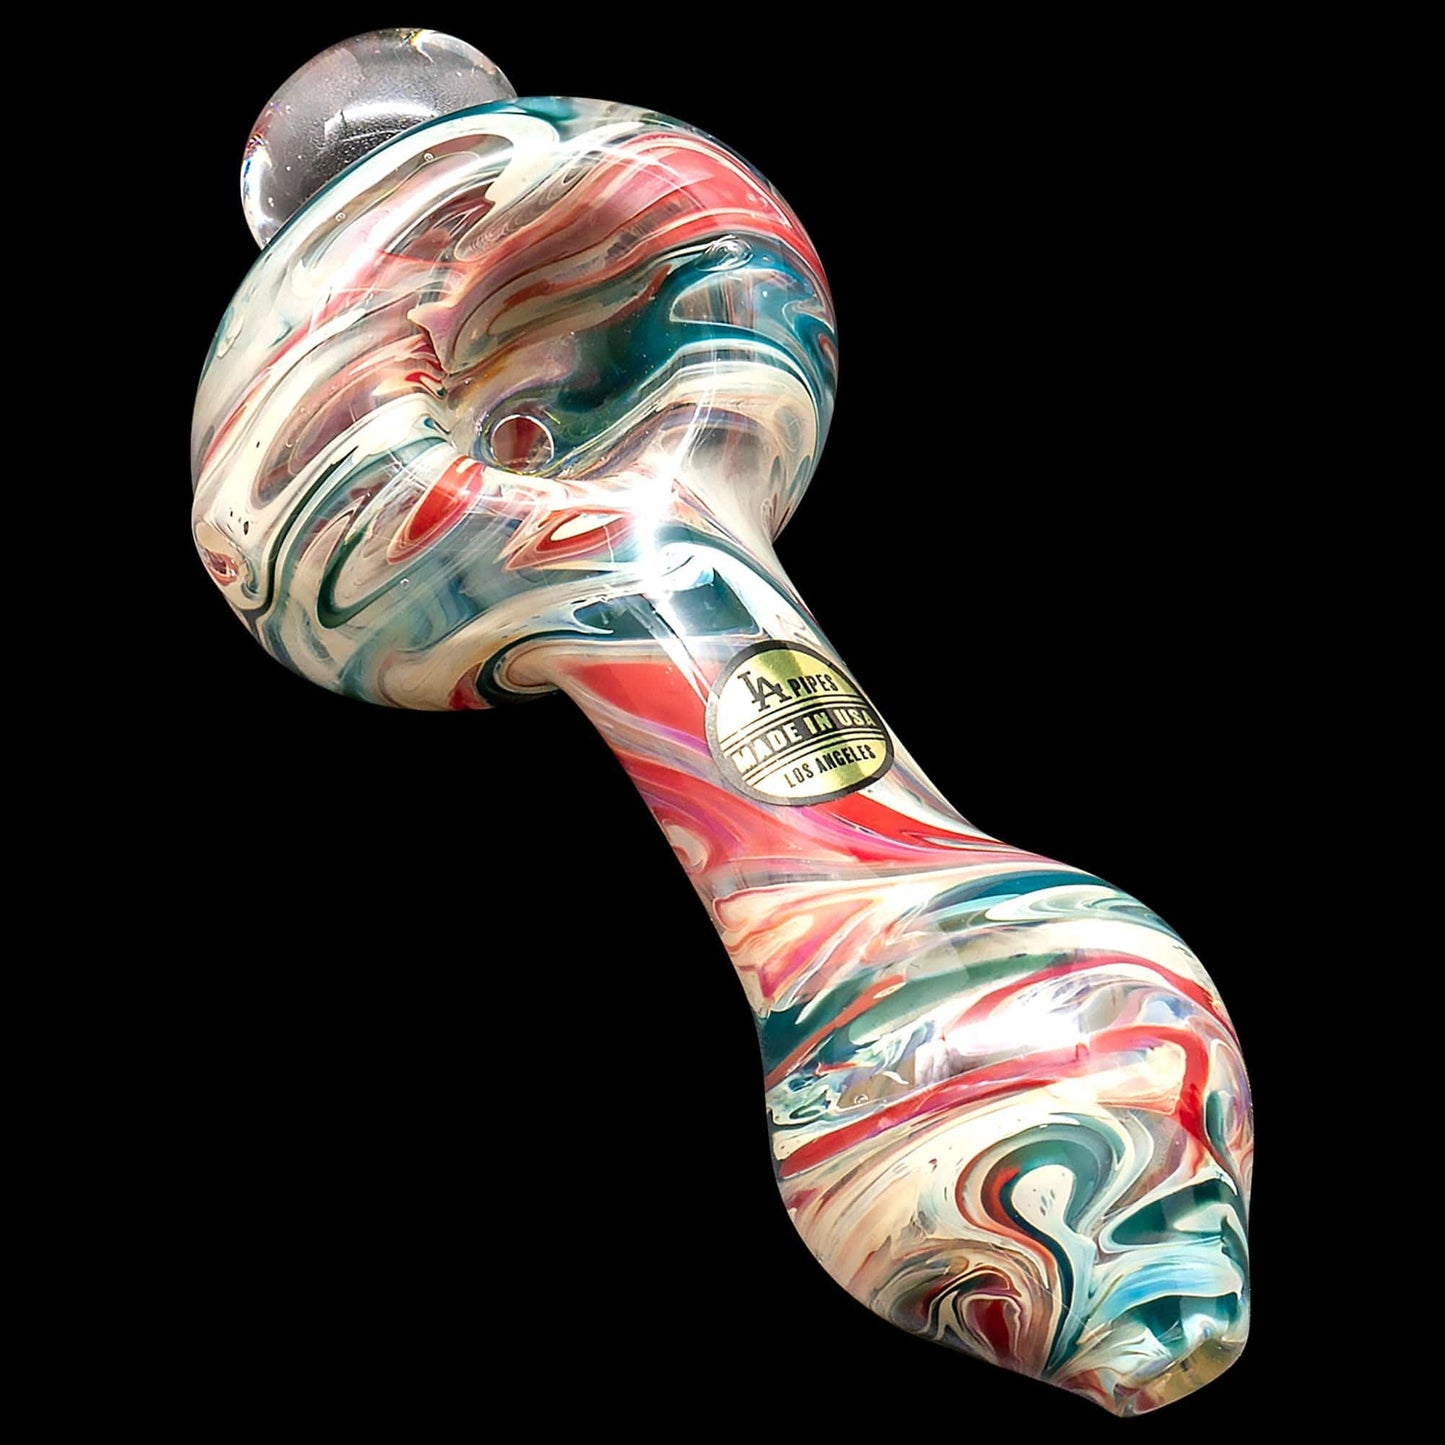 LA Pipes Hand Pipe "Primordial Ooze" Glass Spoon Pipe